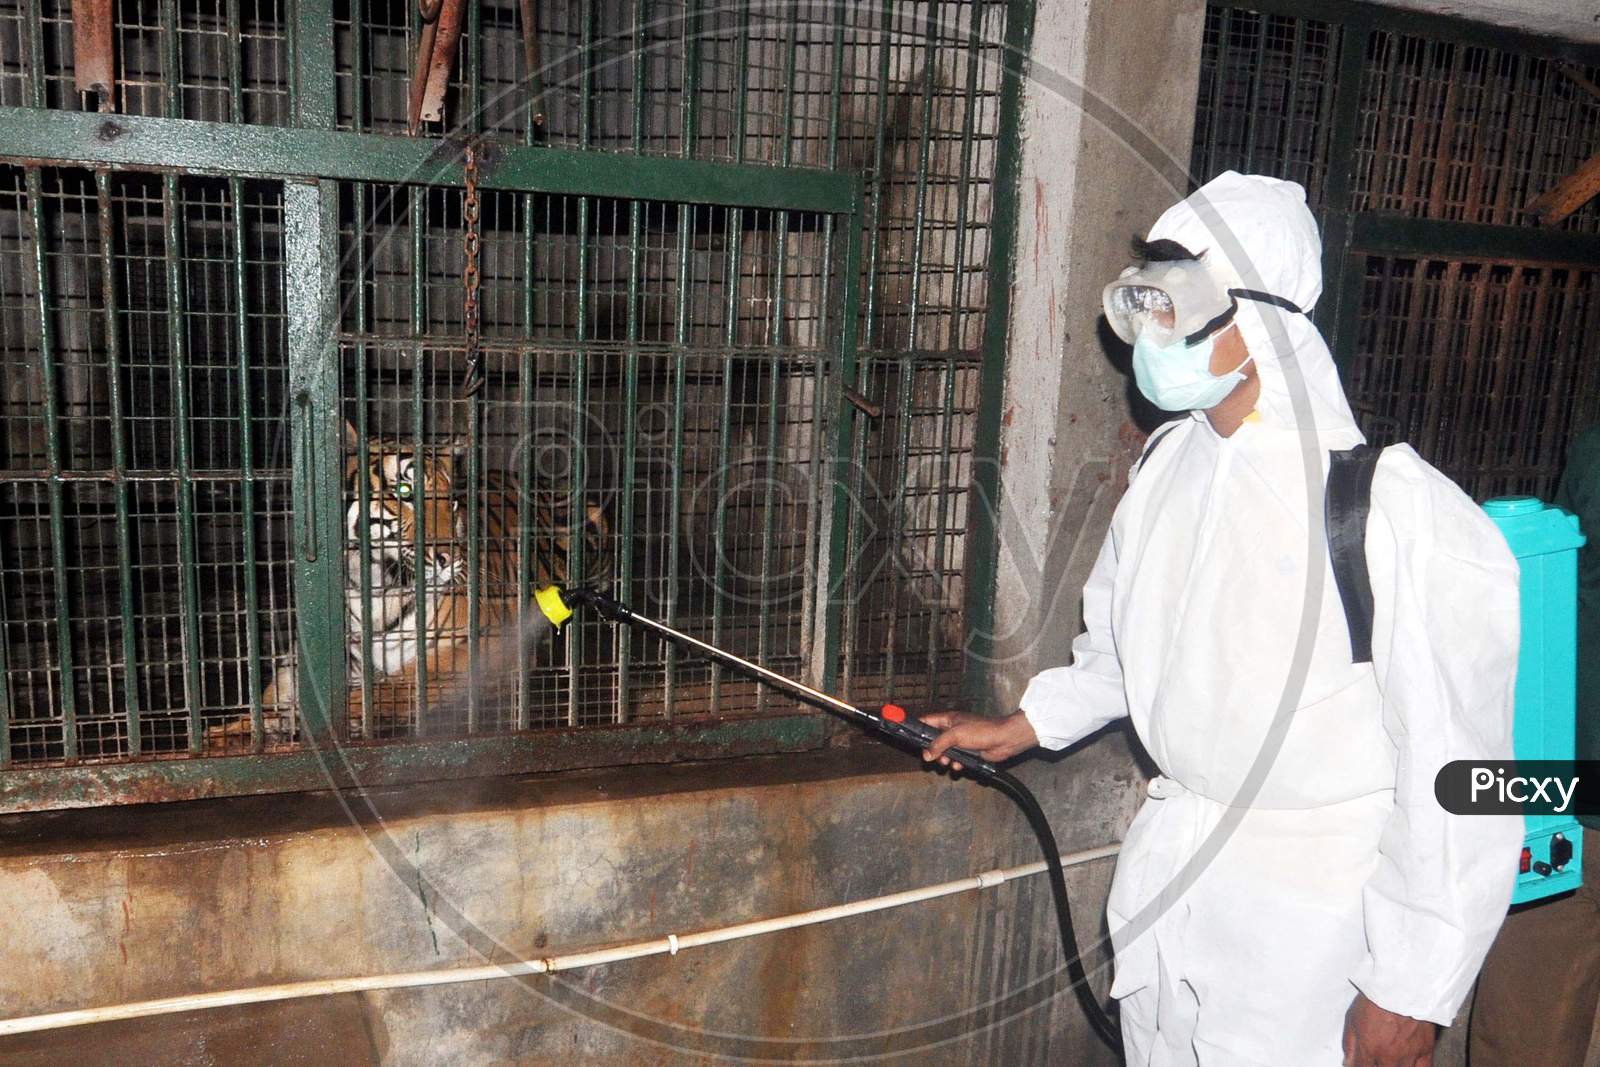 A Worker Wears Personal Protective Equipment (Ppe) As He Sprays Disinfectants At The Cages Of Tiger As A Preventive Measure Against The Spread Of The Covid-19 Coronavirus At Assam State Zoo In Guwahati, India